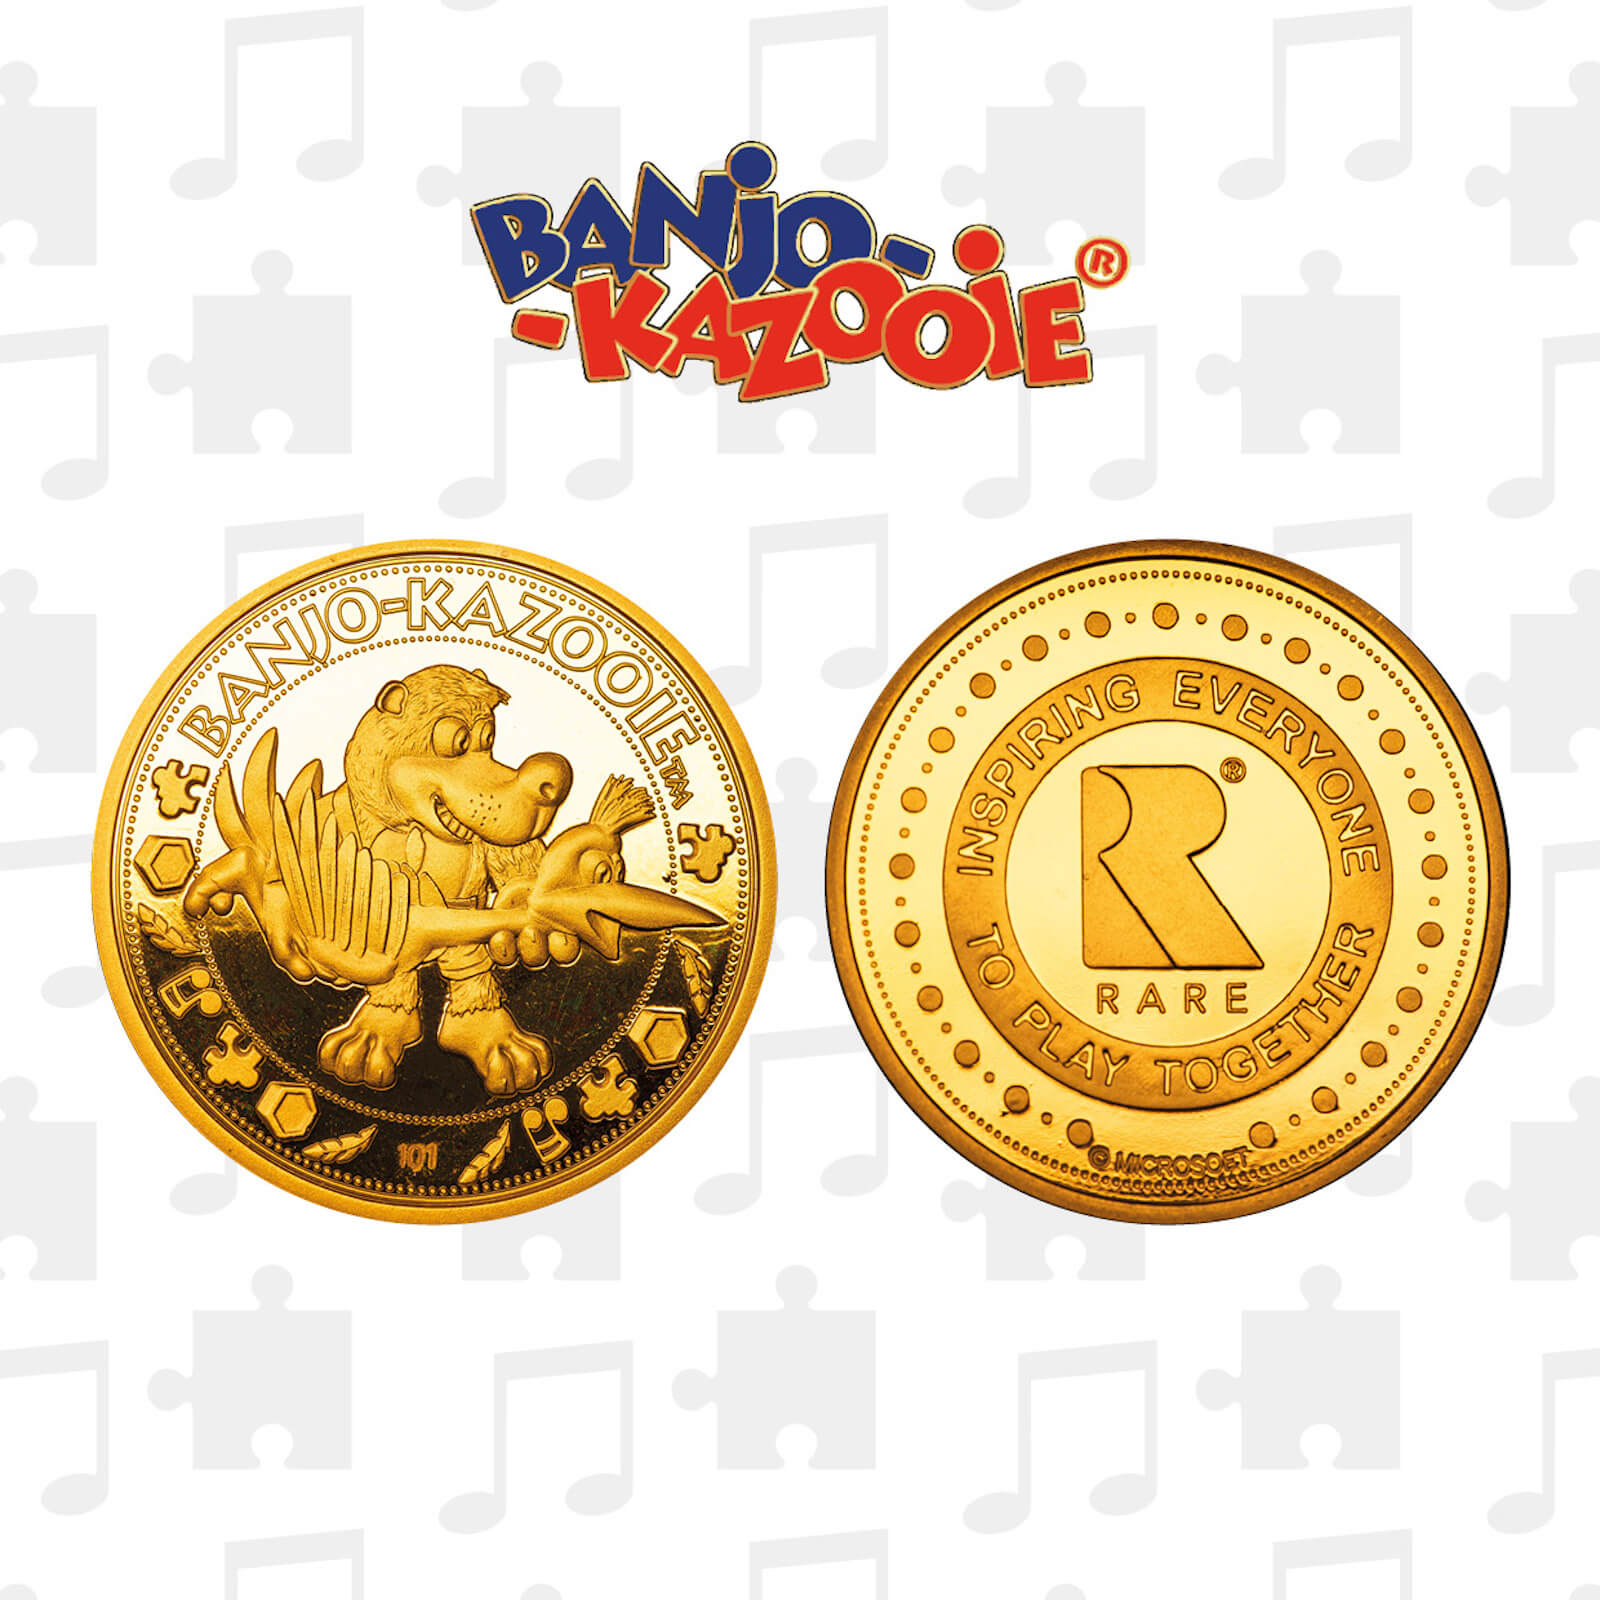 Image of Banjo Kazooie Limited Edition Collectible Coin - Gold Edition